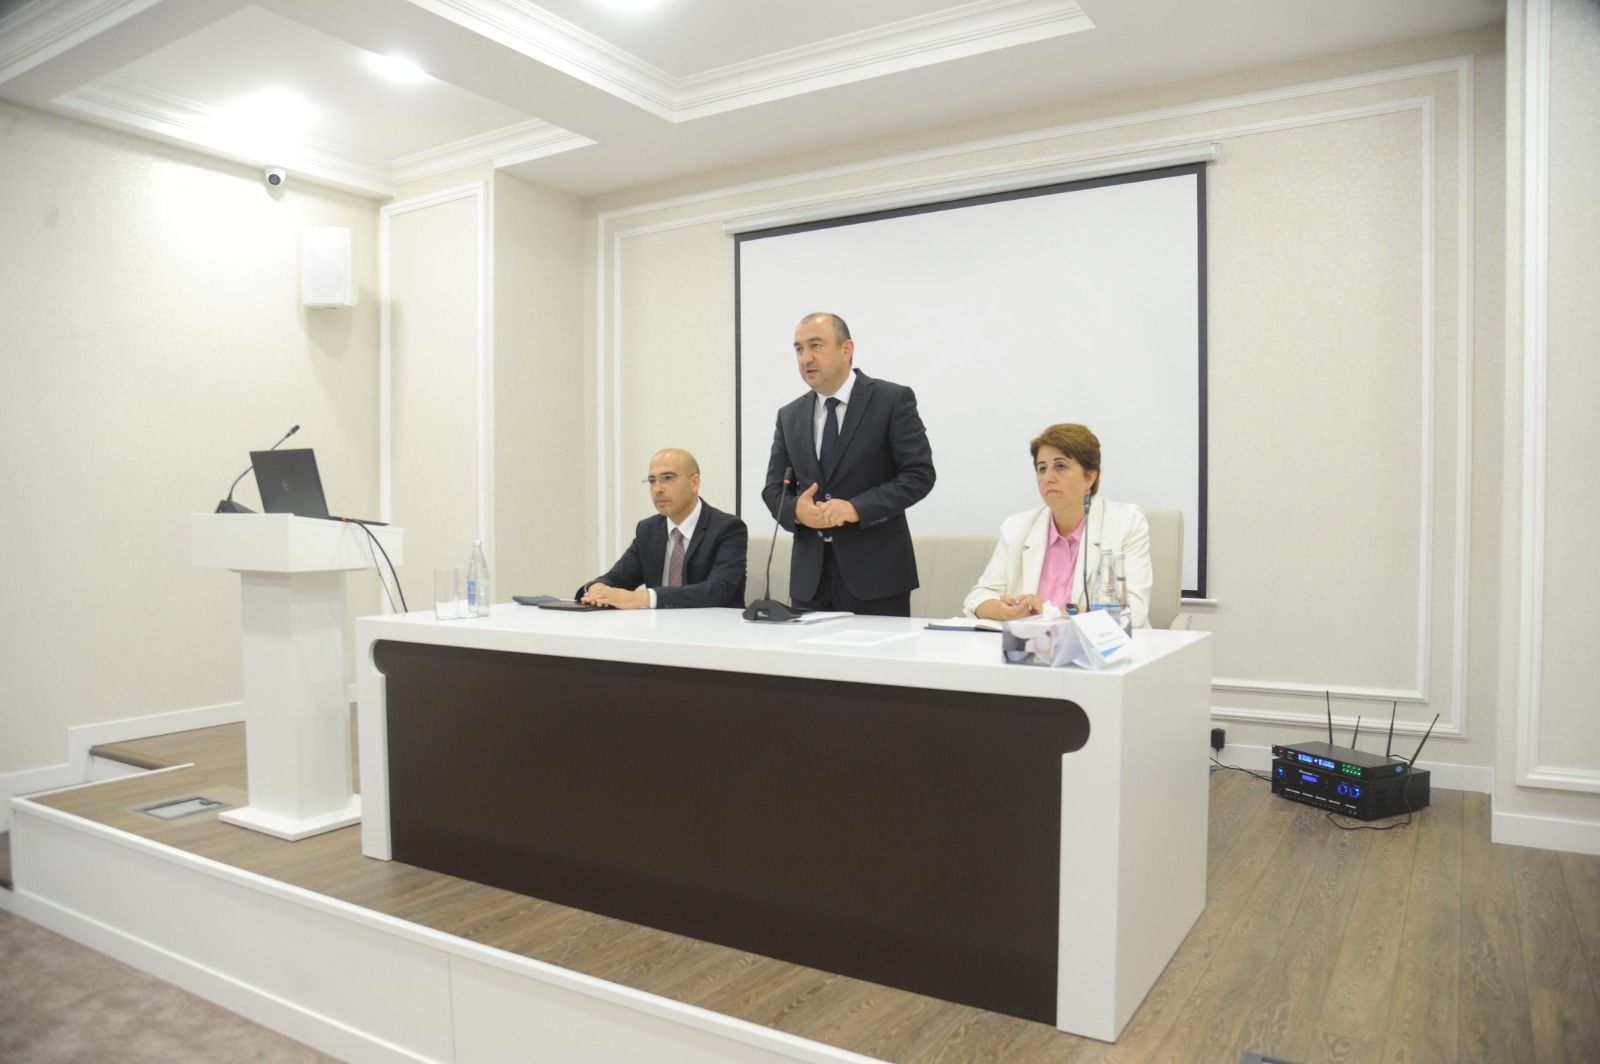 Working group on ecological issues holds meeting in Azerbaijan's Shusha [PHOTOS]